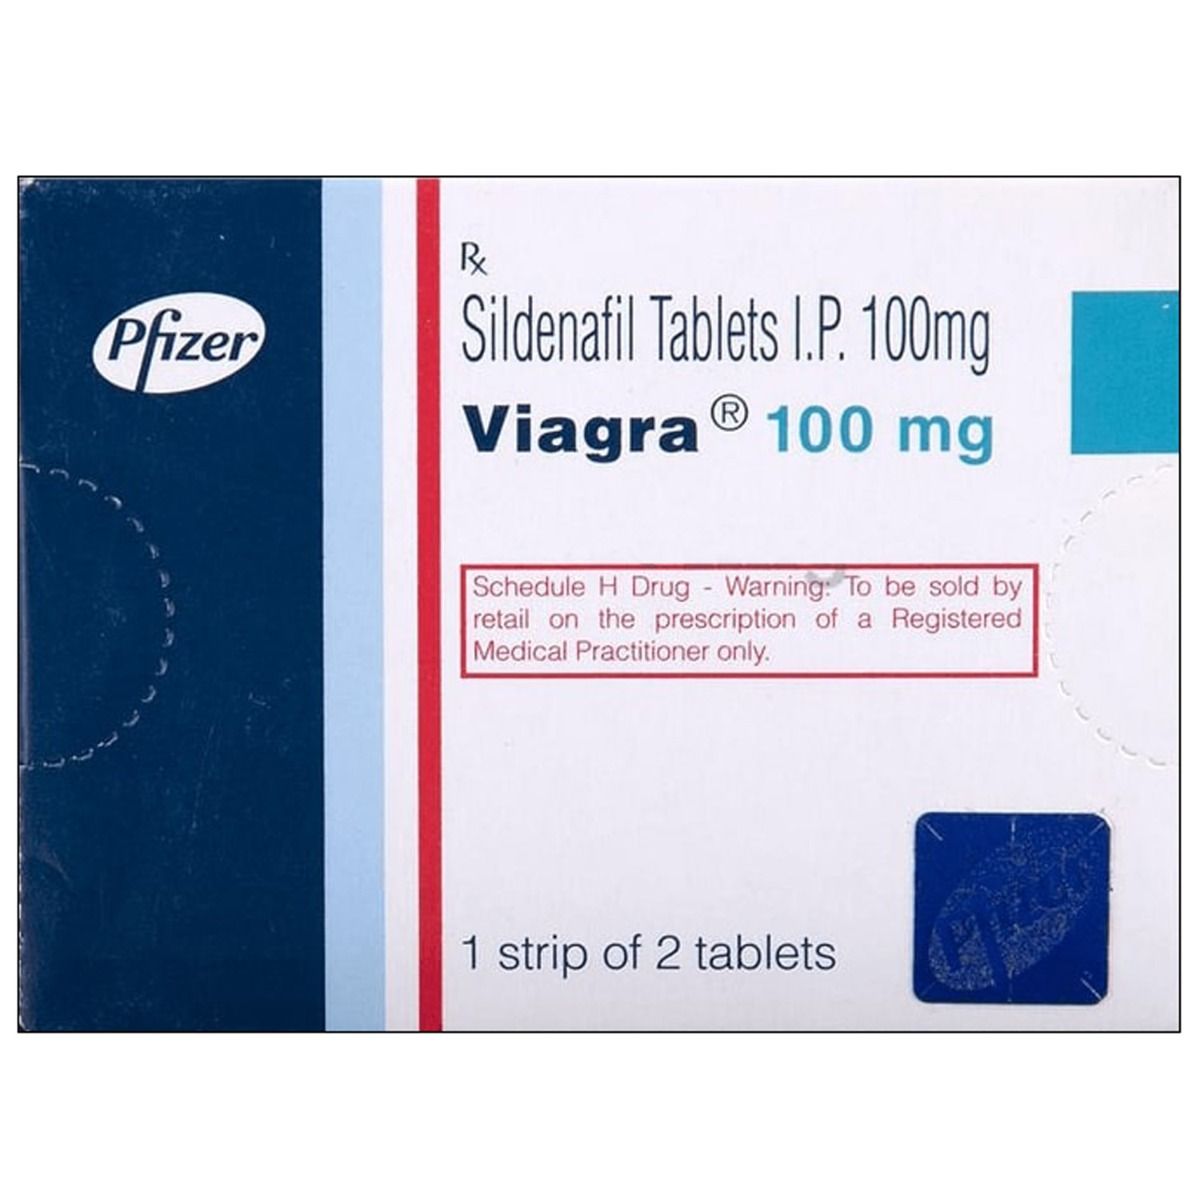 Viagra Tablet Uses Benefits and Symptoms Side Effects